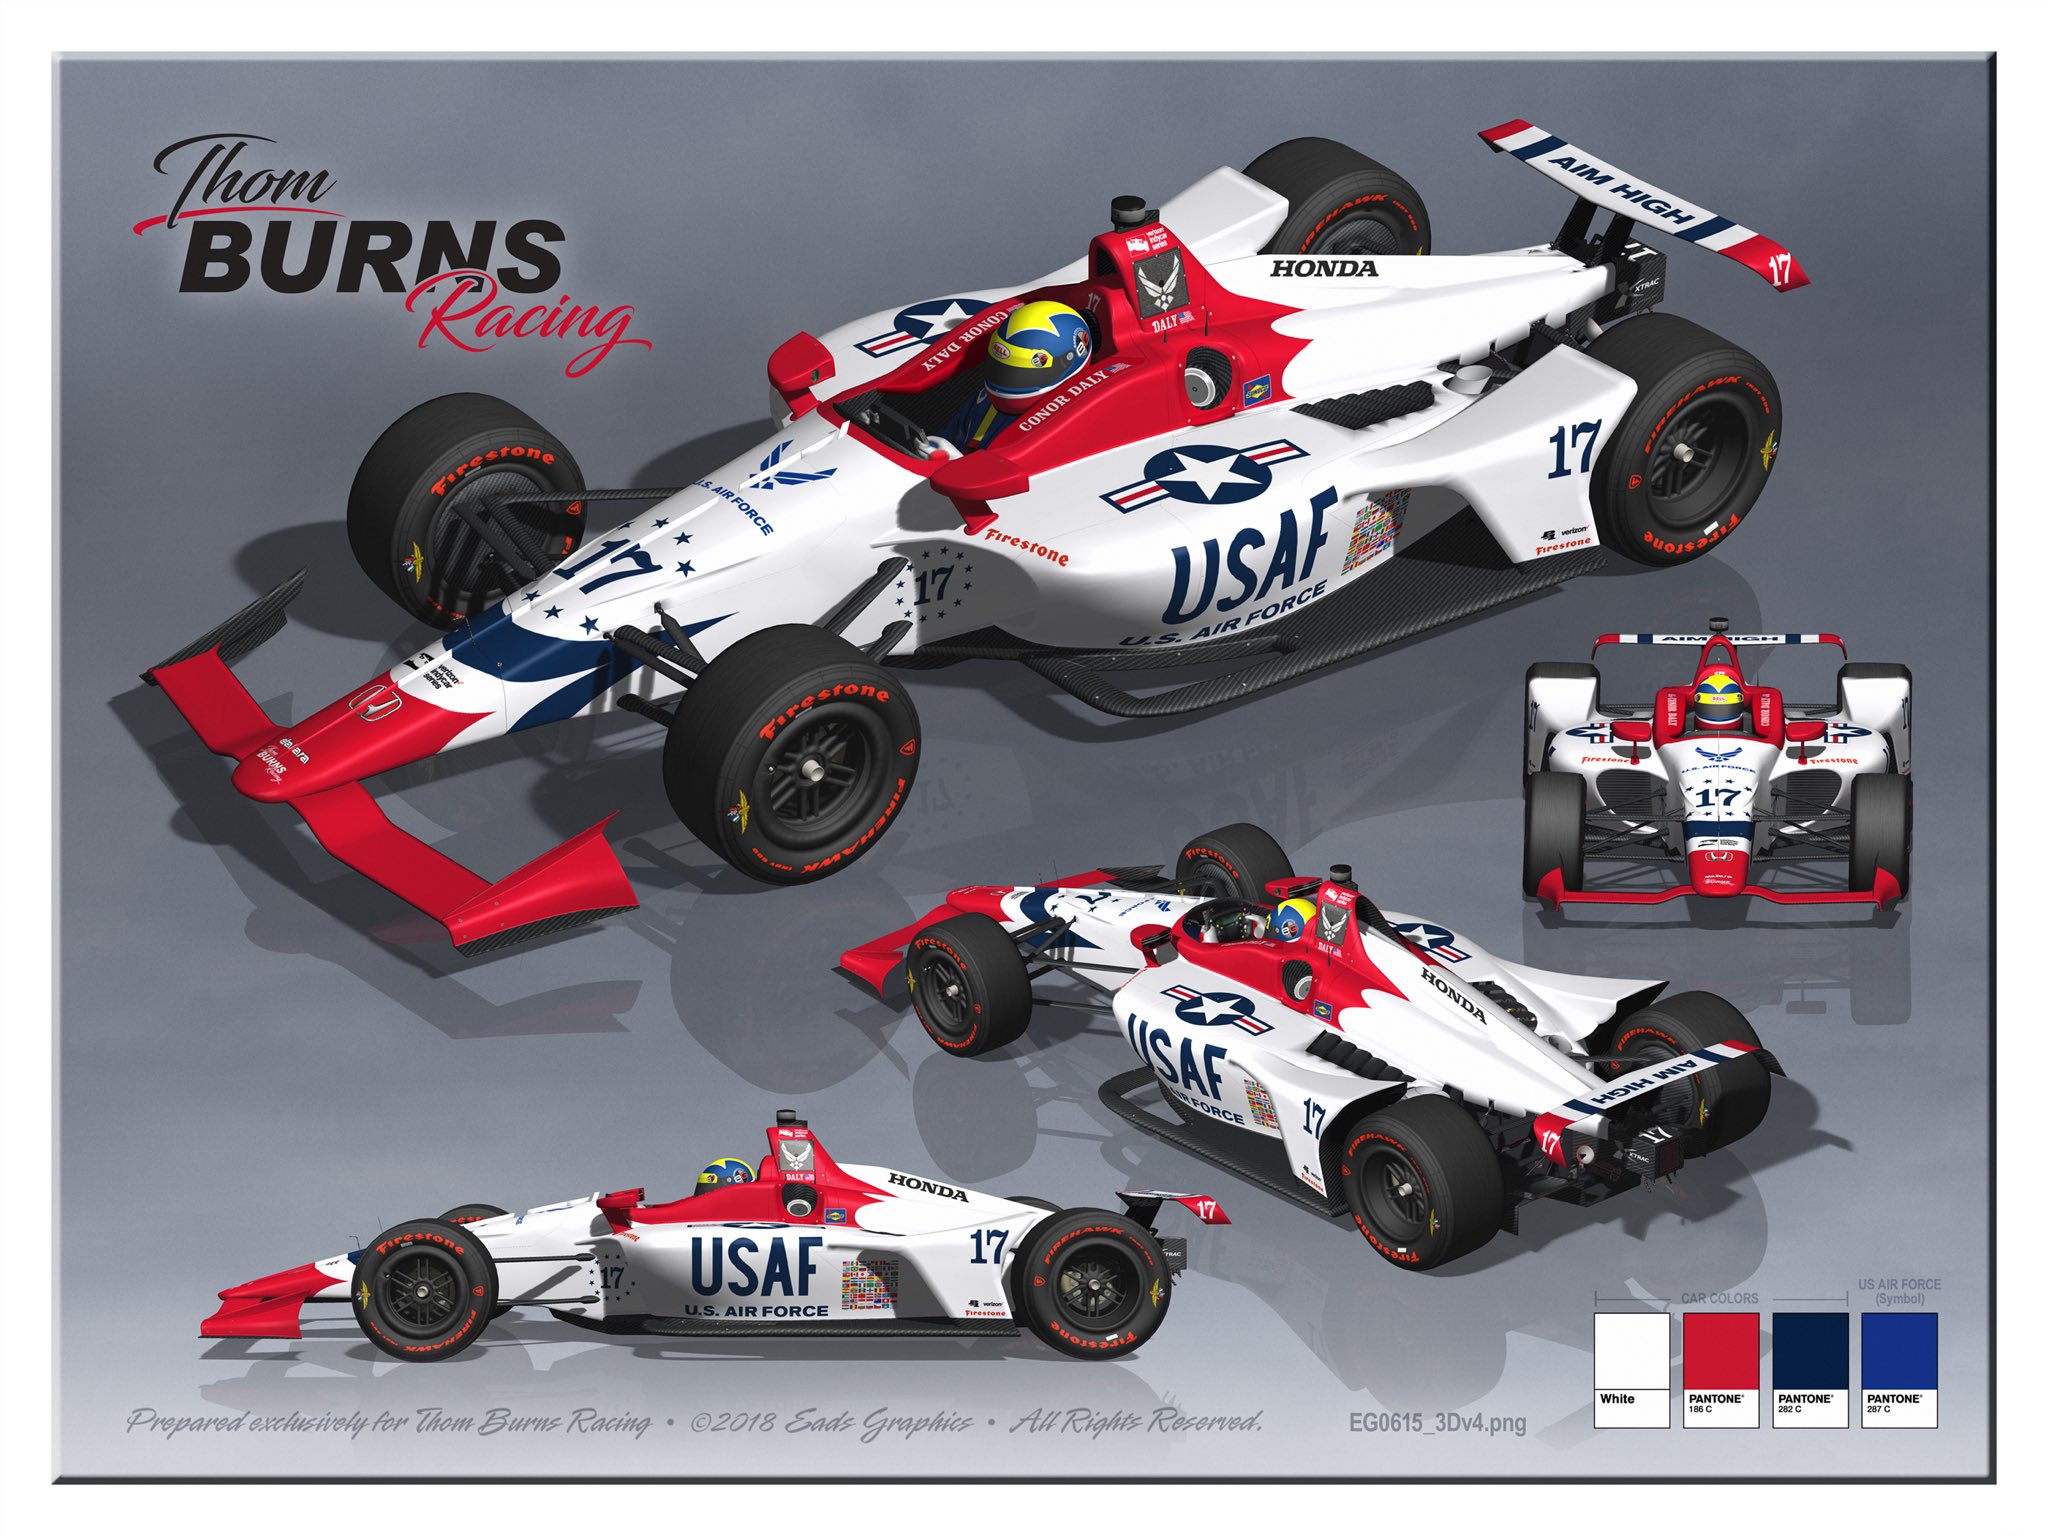 Daly's livery